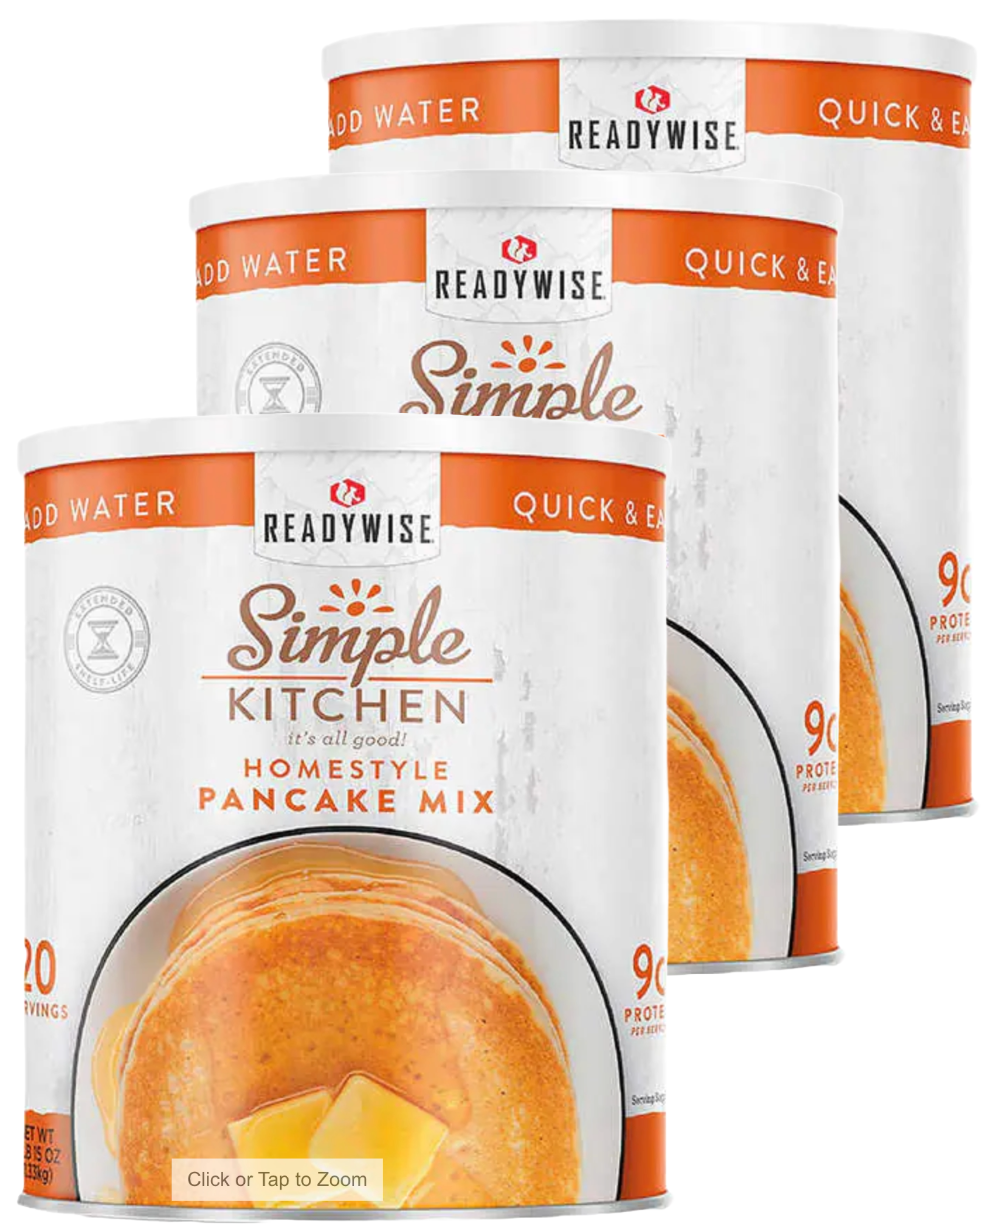 ReadyWise Simple Kitchen Pancake Mix, 3-pack #10 Cans (60 Total